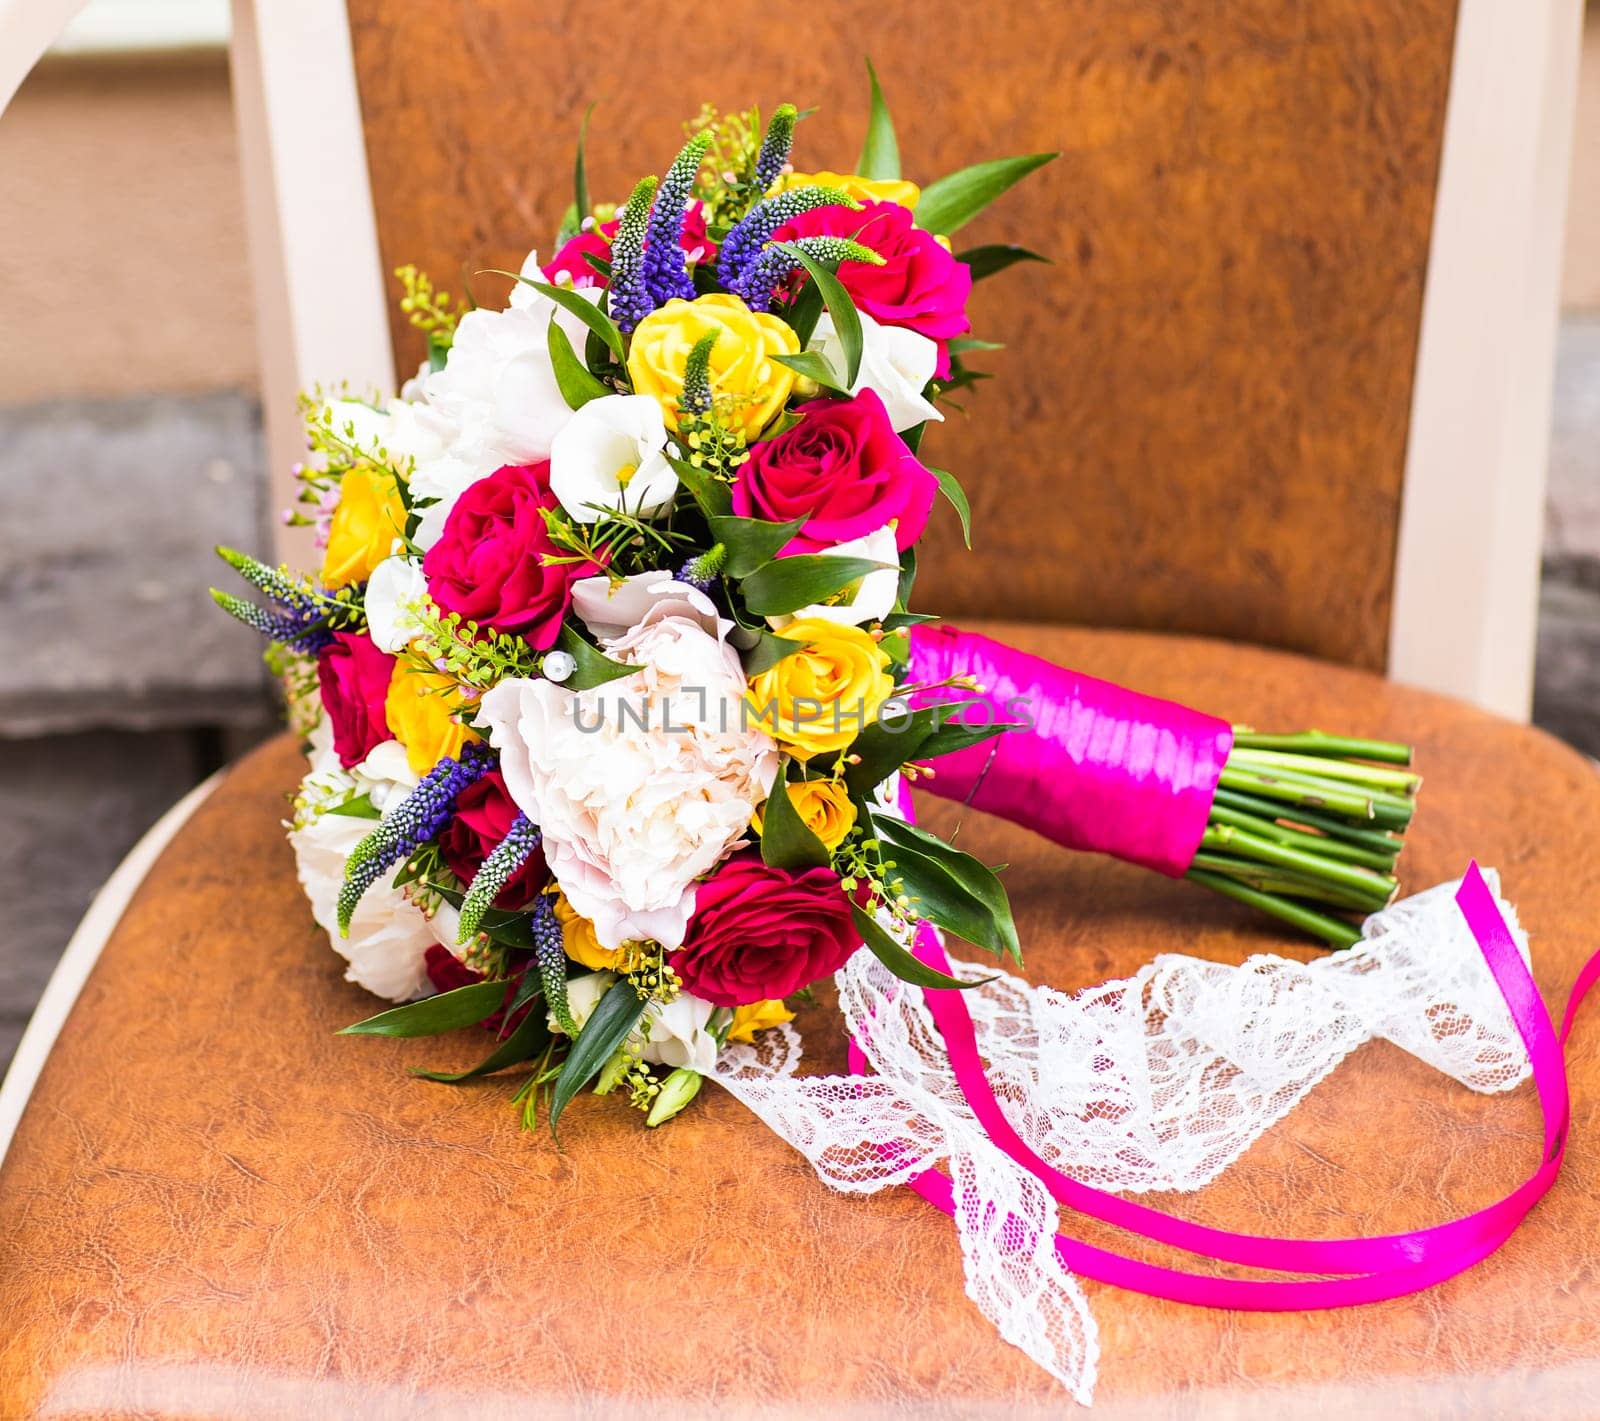 Colorful bridal bouquet by Satura86